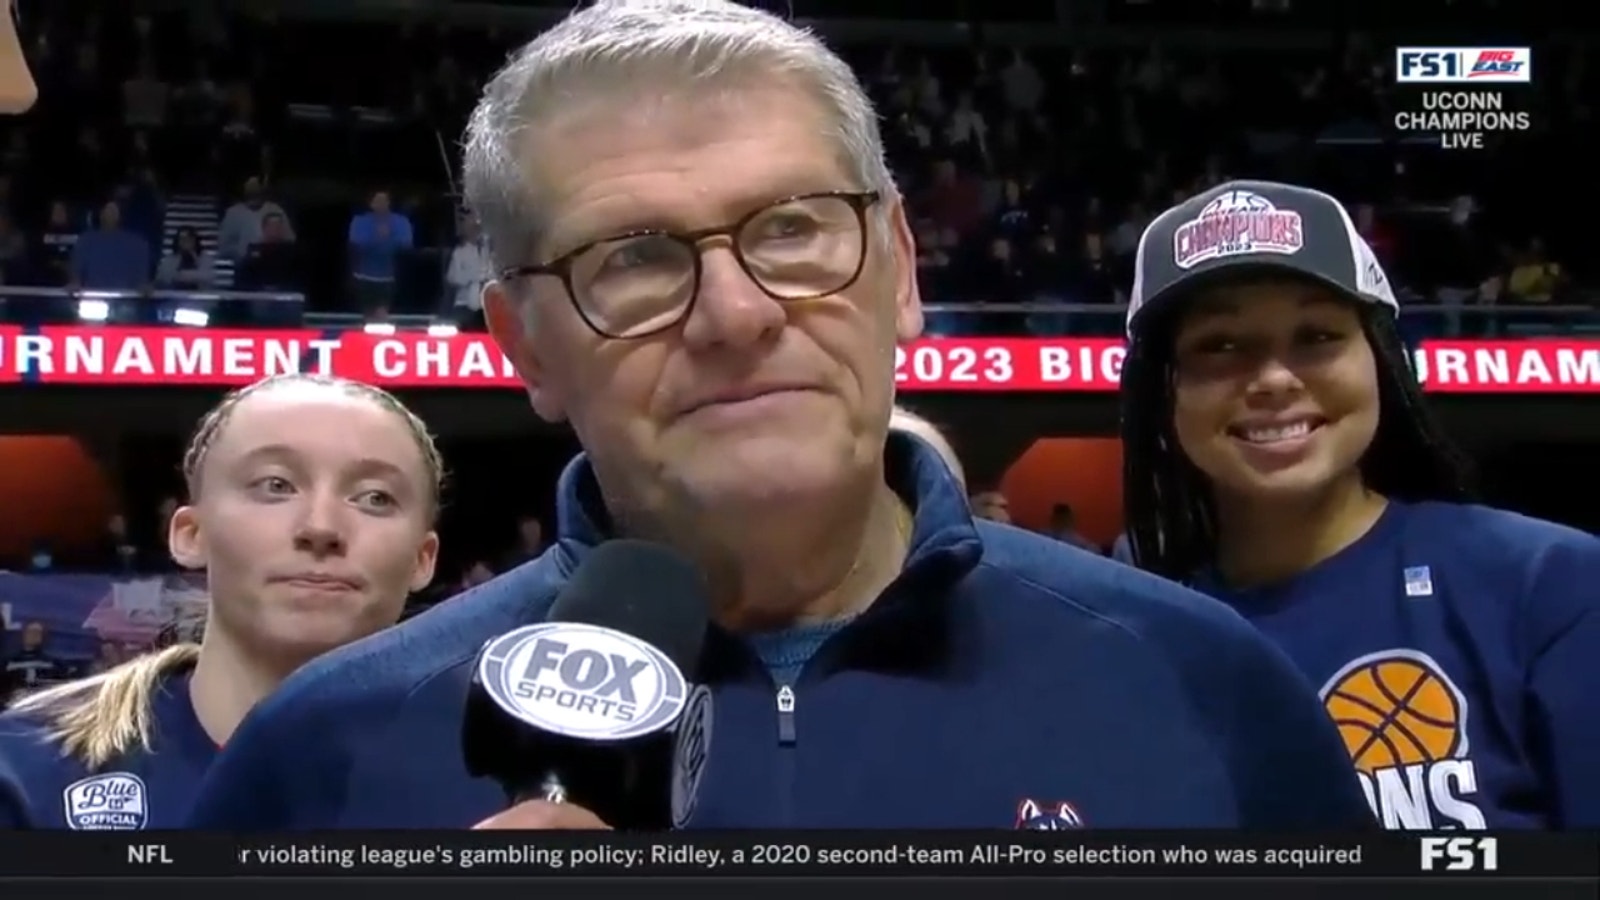 UConn Coach Geno Auriemma on Huskies Conquering Big East Championship: 'These Kids Know When It's March'